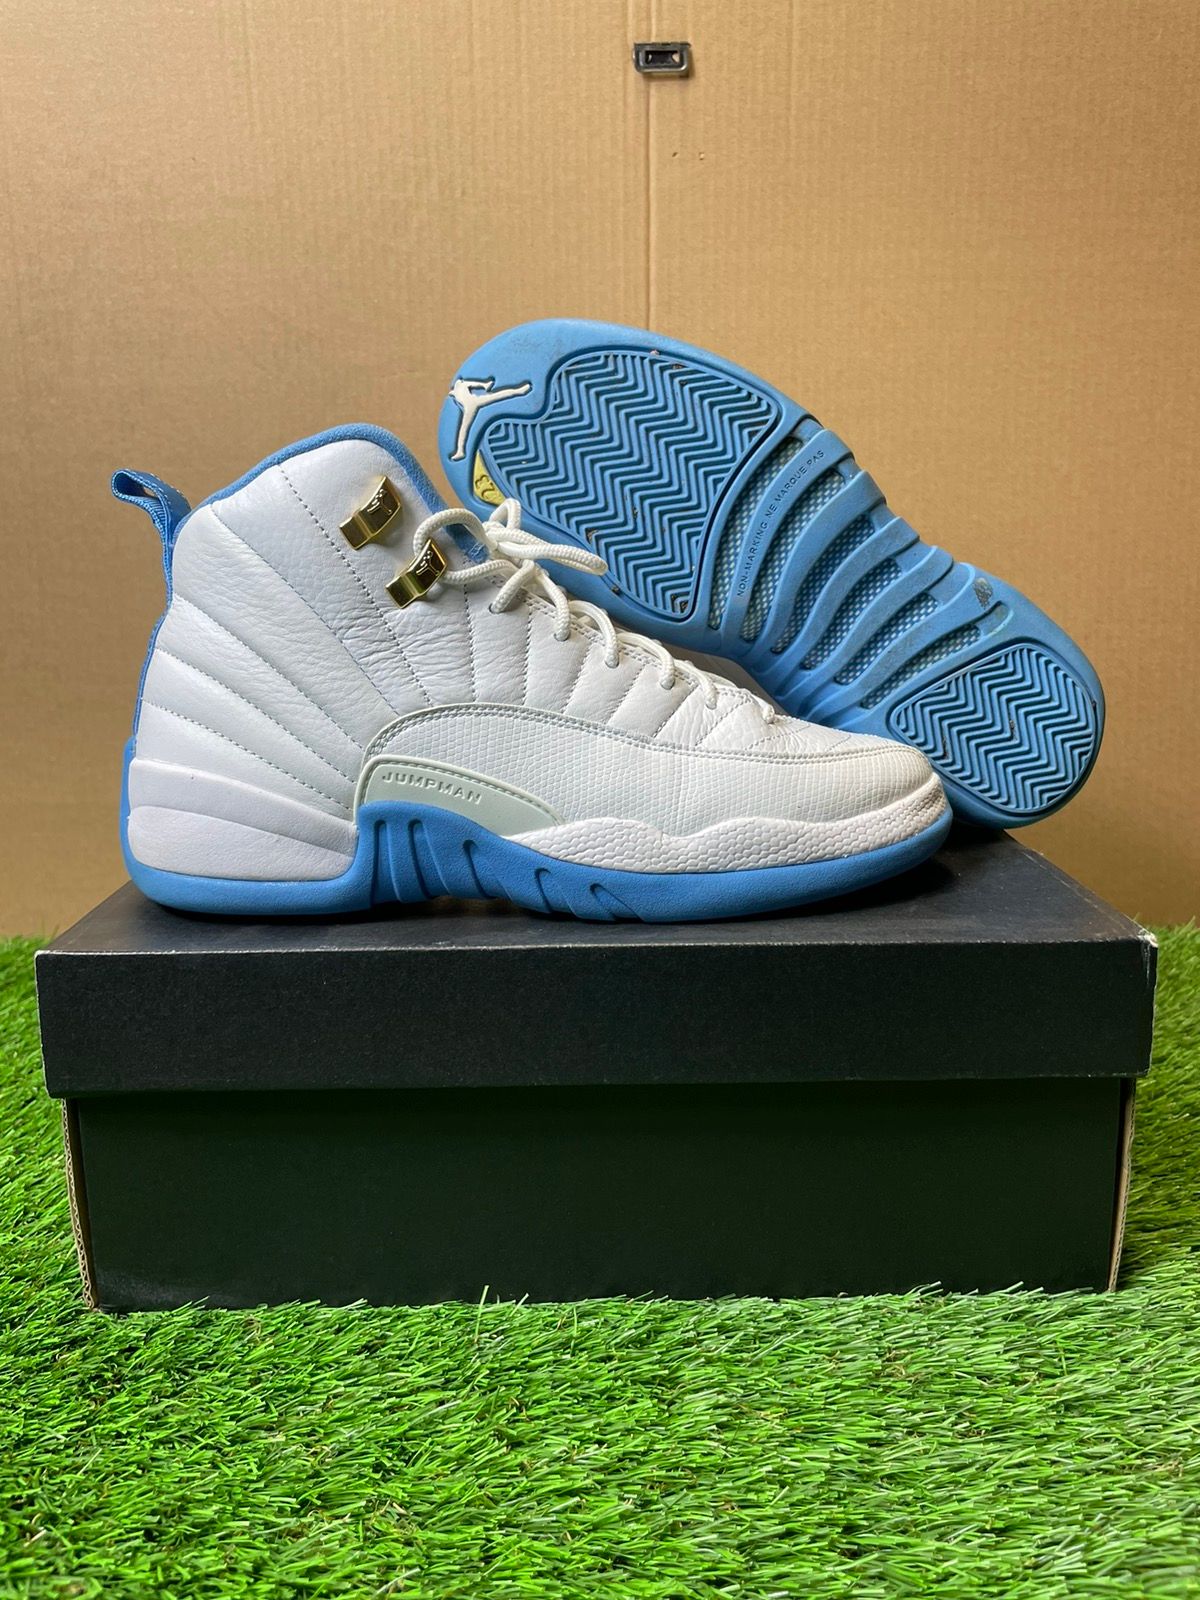 Pre-owned Jordan Brand 12 University Blue Size 7 Used Shoes In White